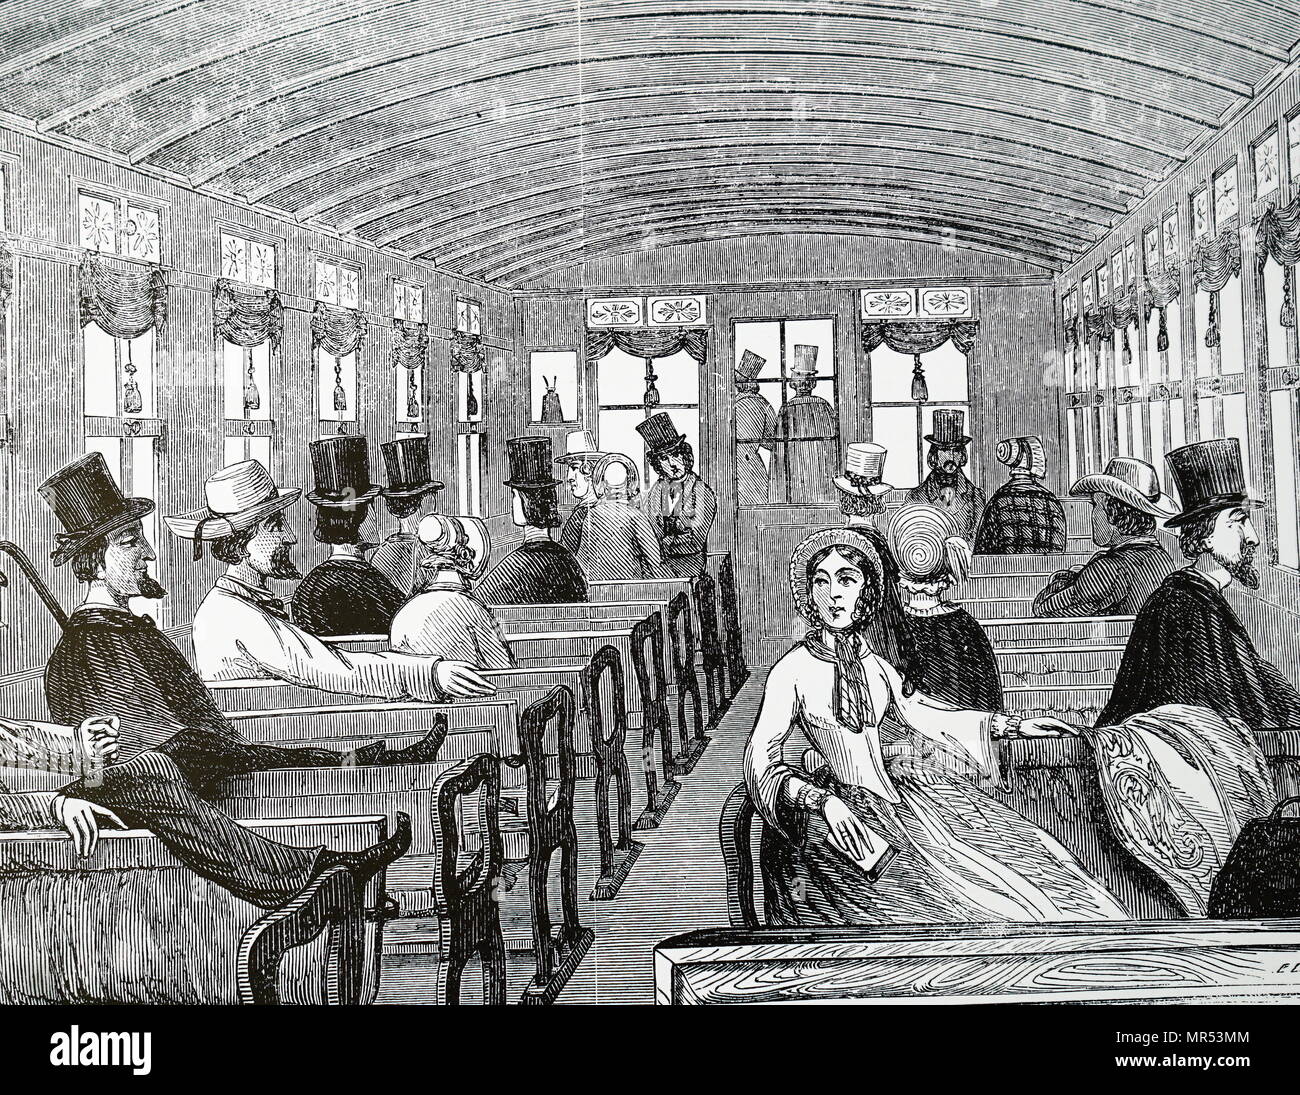 Illustration depicting the interior of a New York tram car. Dated 19th century Stock Photo